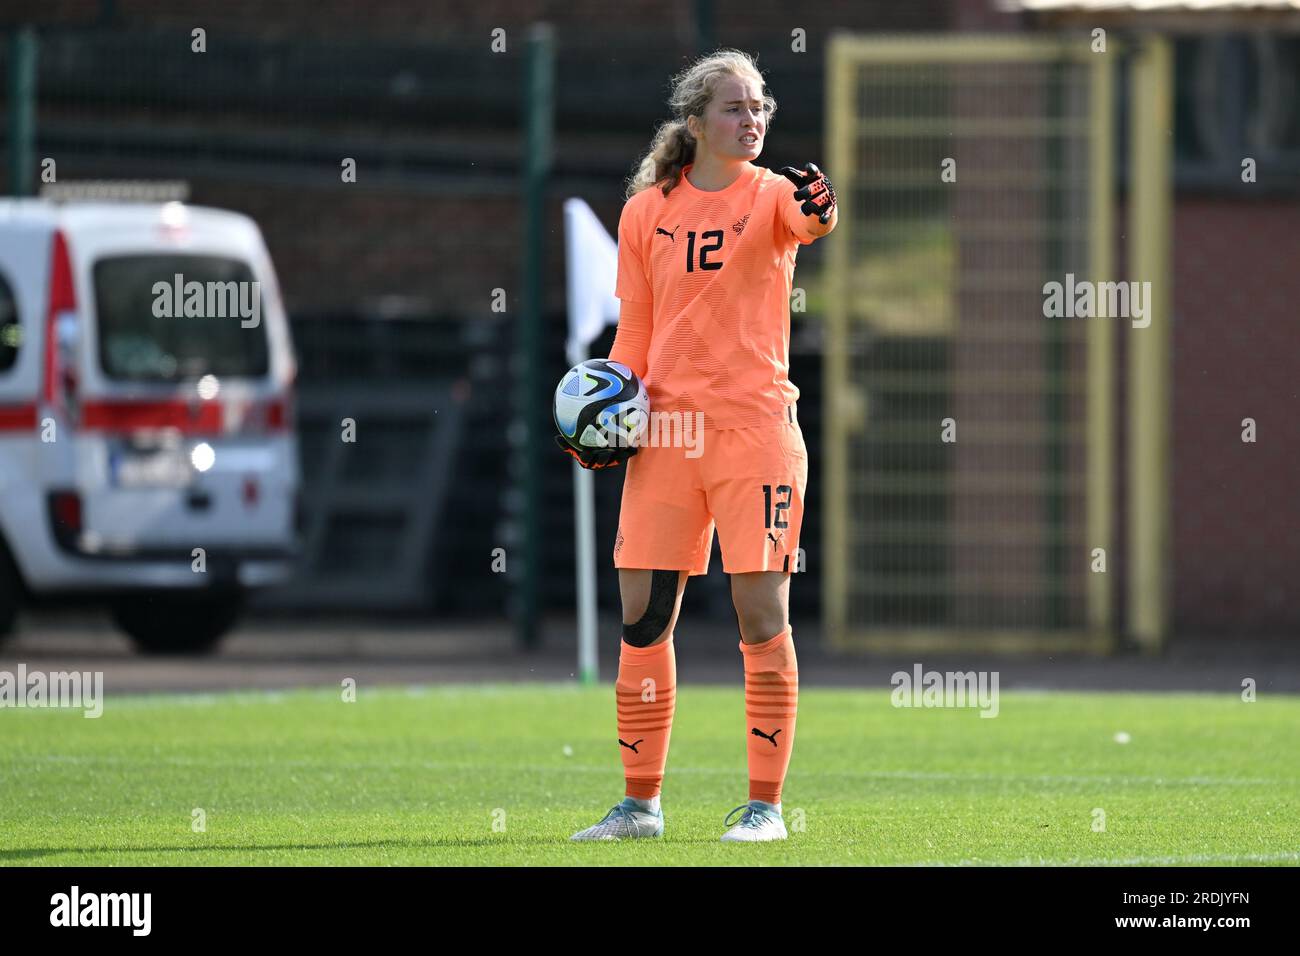 La Louviere, Belgium. 21st July, 2023. goalkeeper Fanney Inga Birkisdottir (12) of Iceland pictured during a female soccer game between the national women under 19 teams of Iceland and Czechia at the UEFA Women's Under-19 EURO Final Tournament on the second matchday in Group B on Friday 21 July 2023 in La Louviere, Belgium . Credit: sportpix/Alamy Live News Stock Photo